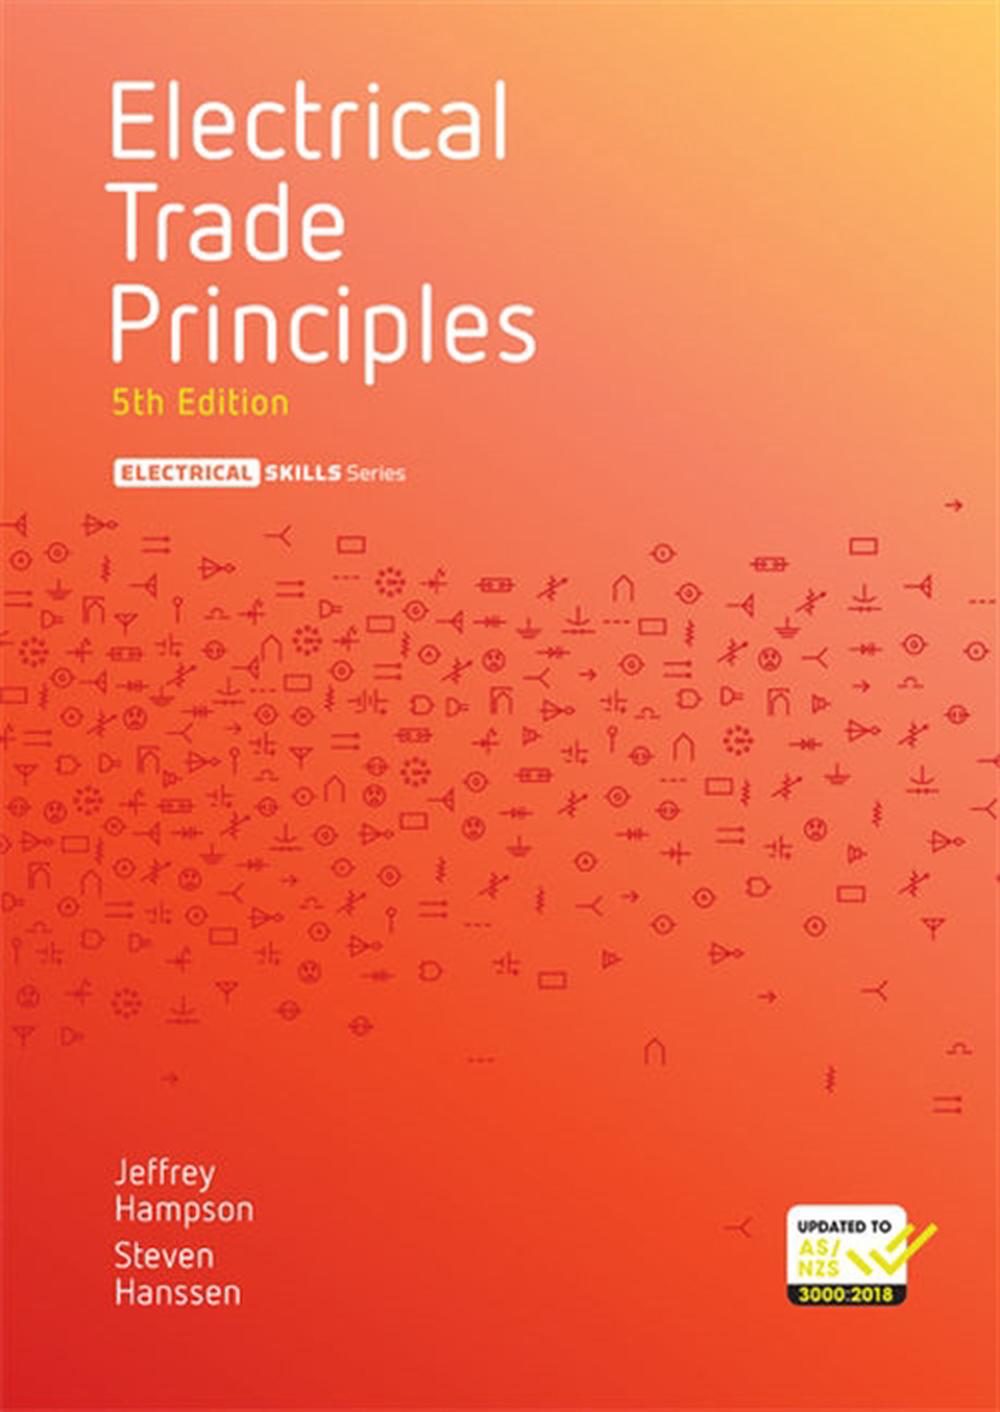 Electrical Trade Principles 5th Edition by Jeffrey Hampson (English) Paperback B 9780170412230